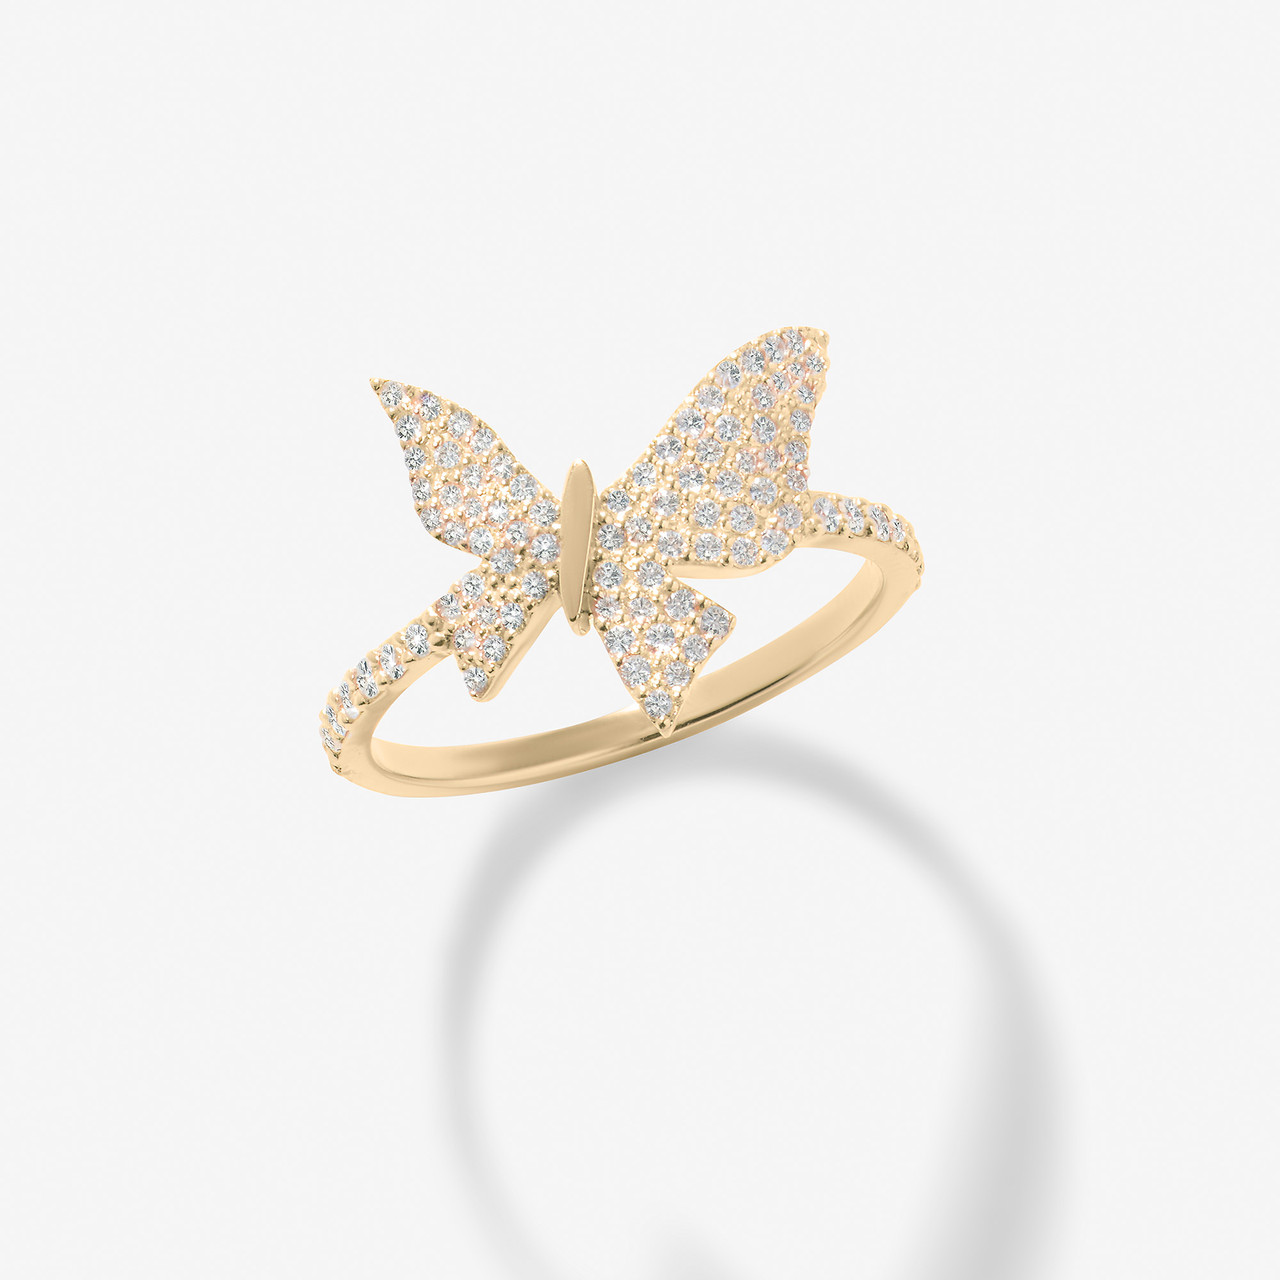 Buy 14k Butterfly Ring, Butterfly Ring, Gold Butterfly Ring, Gold Butterfly,  Dainty Jewelry, Butterfly Jewelry Online in India - Etsy